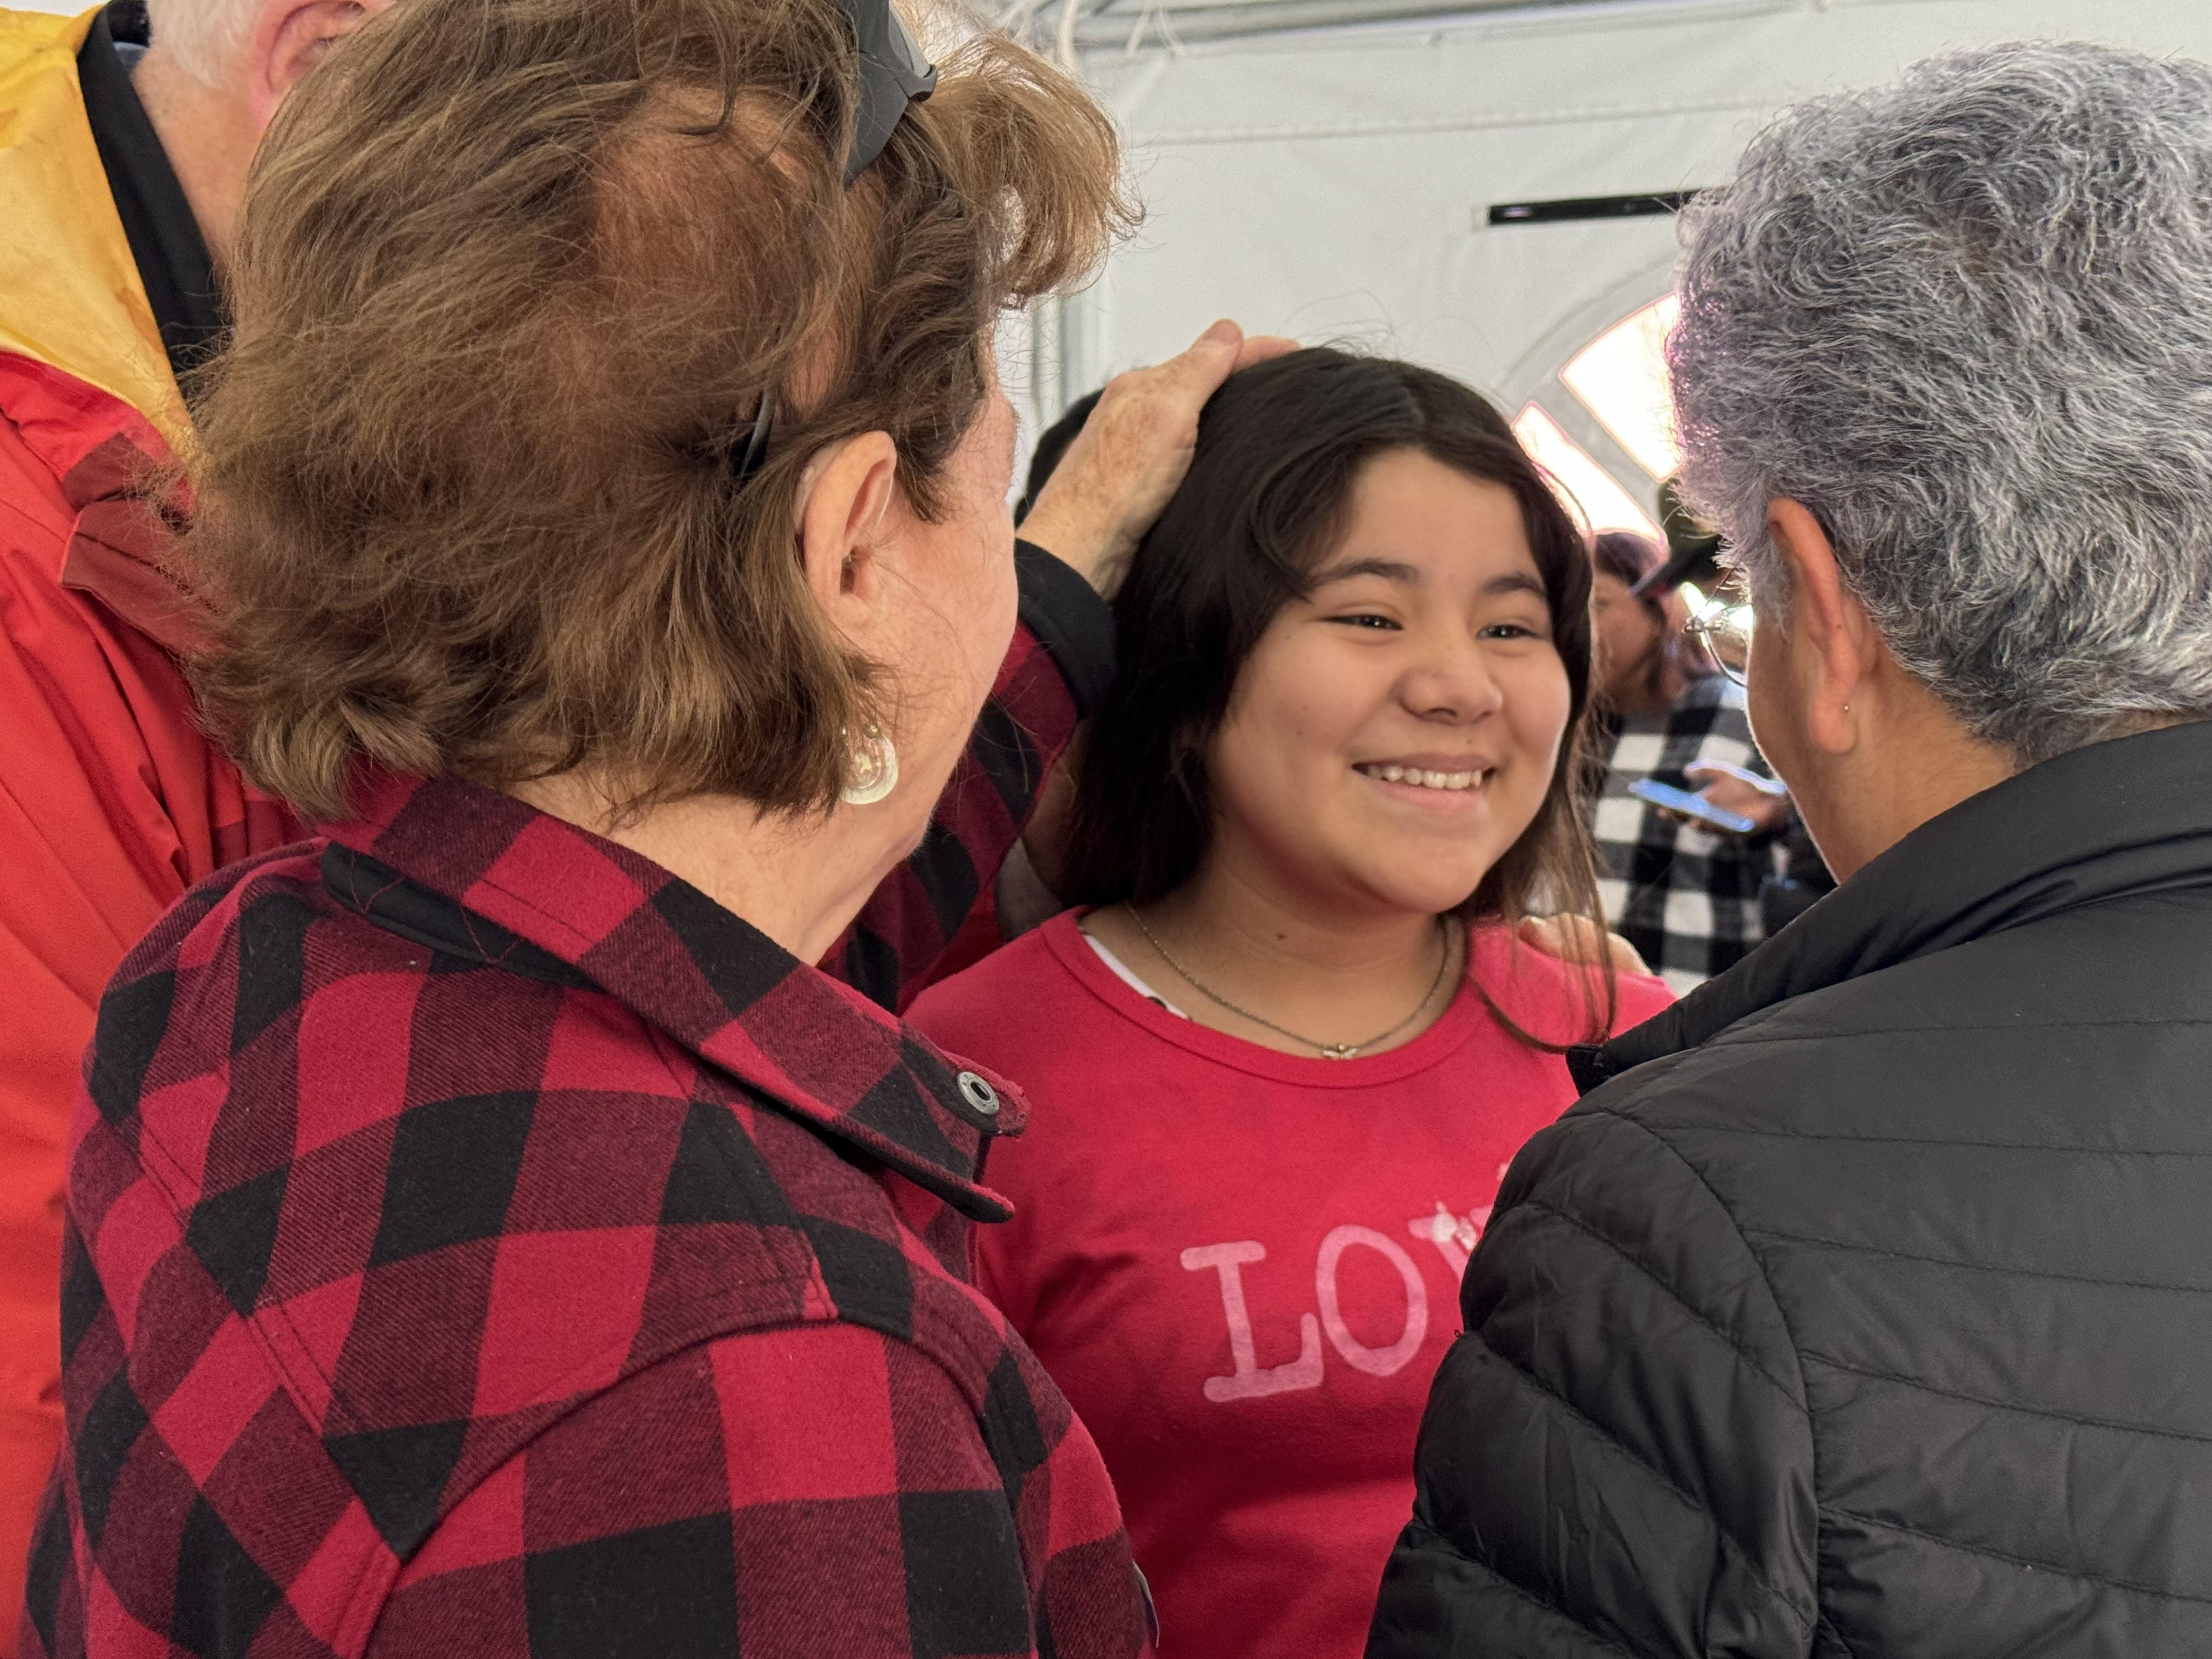 Sr. Carol Selak, of the Sisters of the Holy Name of Jesus and Mary, and Sr. Beatriz Tavera, of the Sisters of Social Service, speak with a teenager after she received a blessing Feb. 8 at the Cobina Posada del Migrante Shelter in Mexicali, Mexico. (GSR photo/Rhina Guidos) 